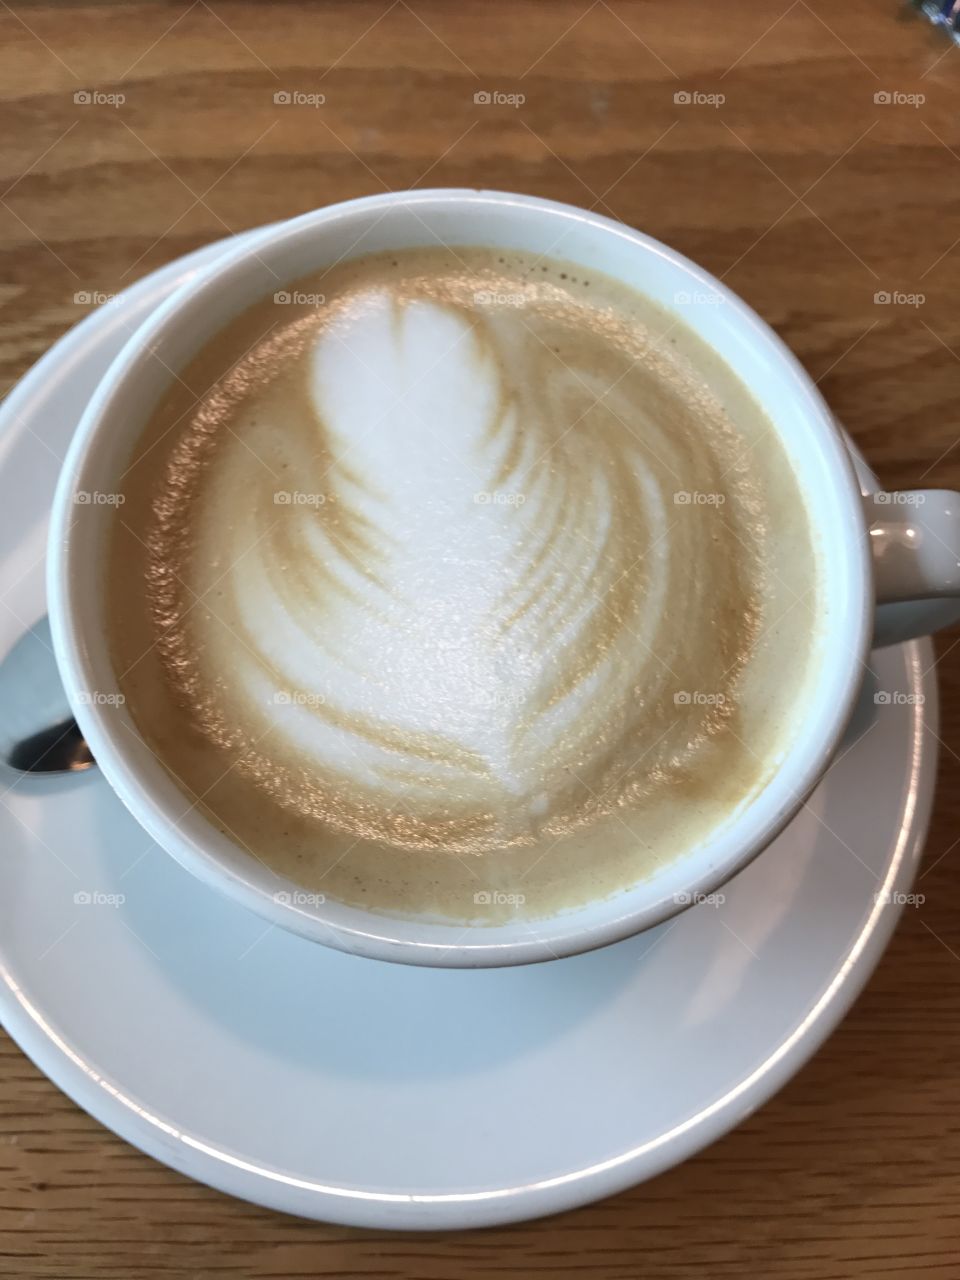 Cappuccino art, can’t go a day without coffee! 